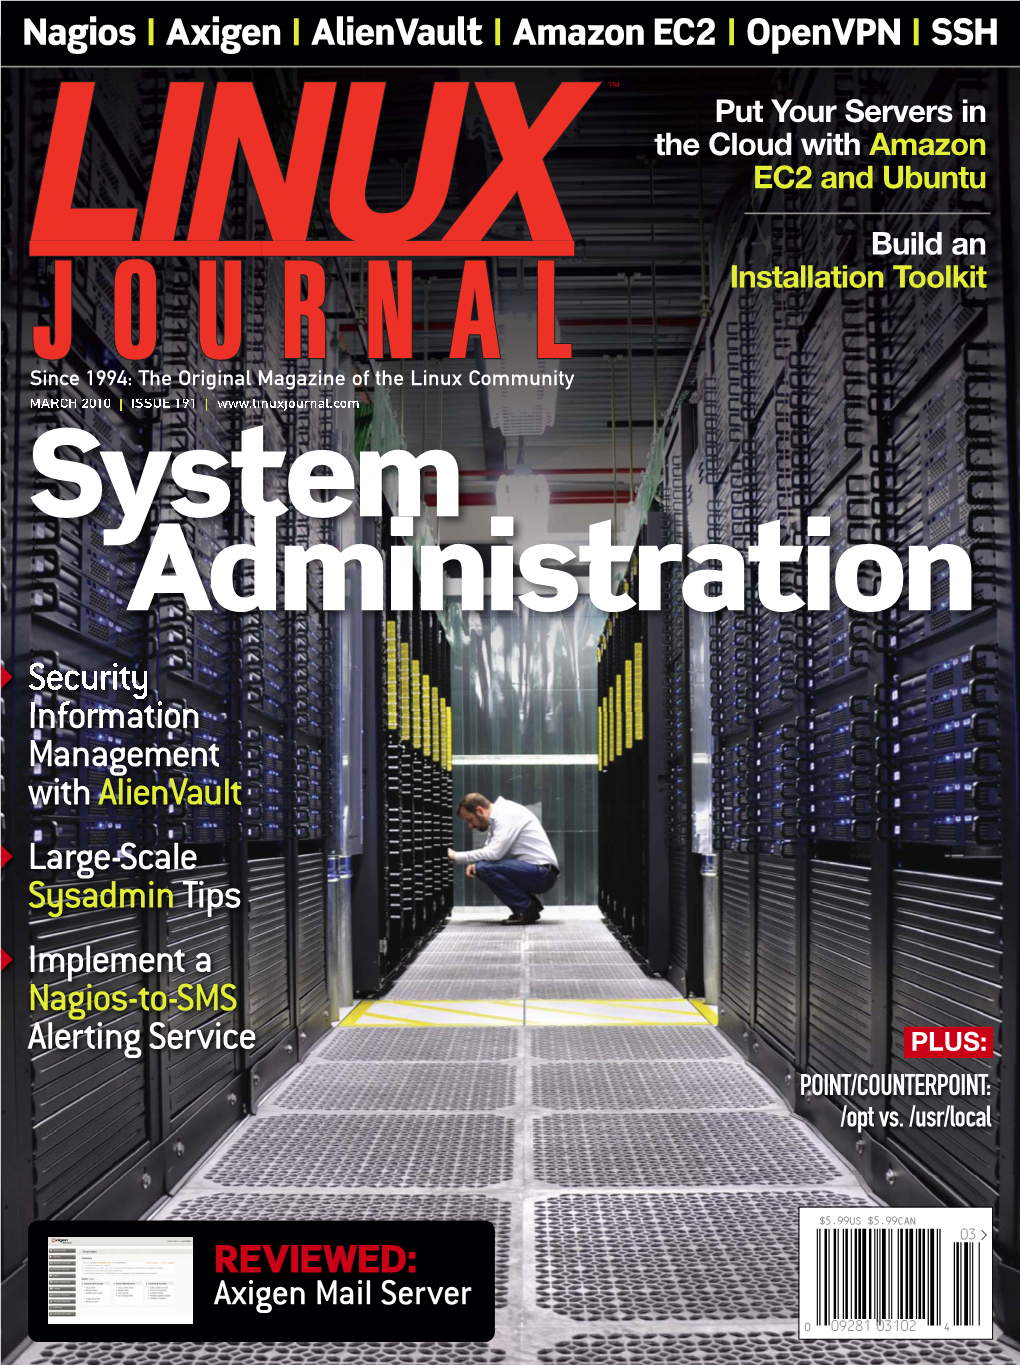 LINUX JOURNAL ™ Put Your Servers in the Cloud with Amazon EC2 and Ubuntu